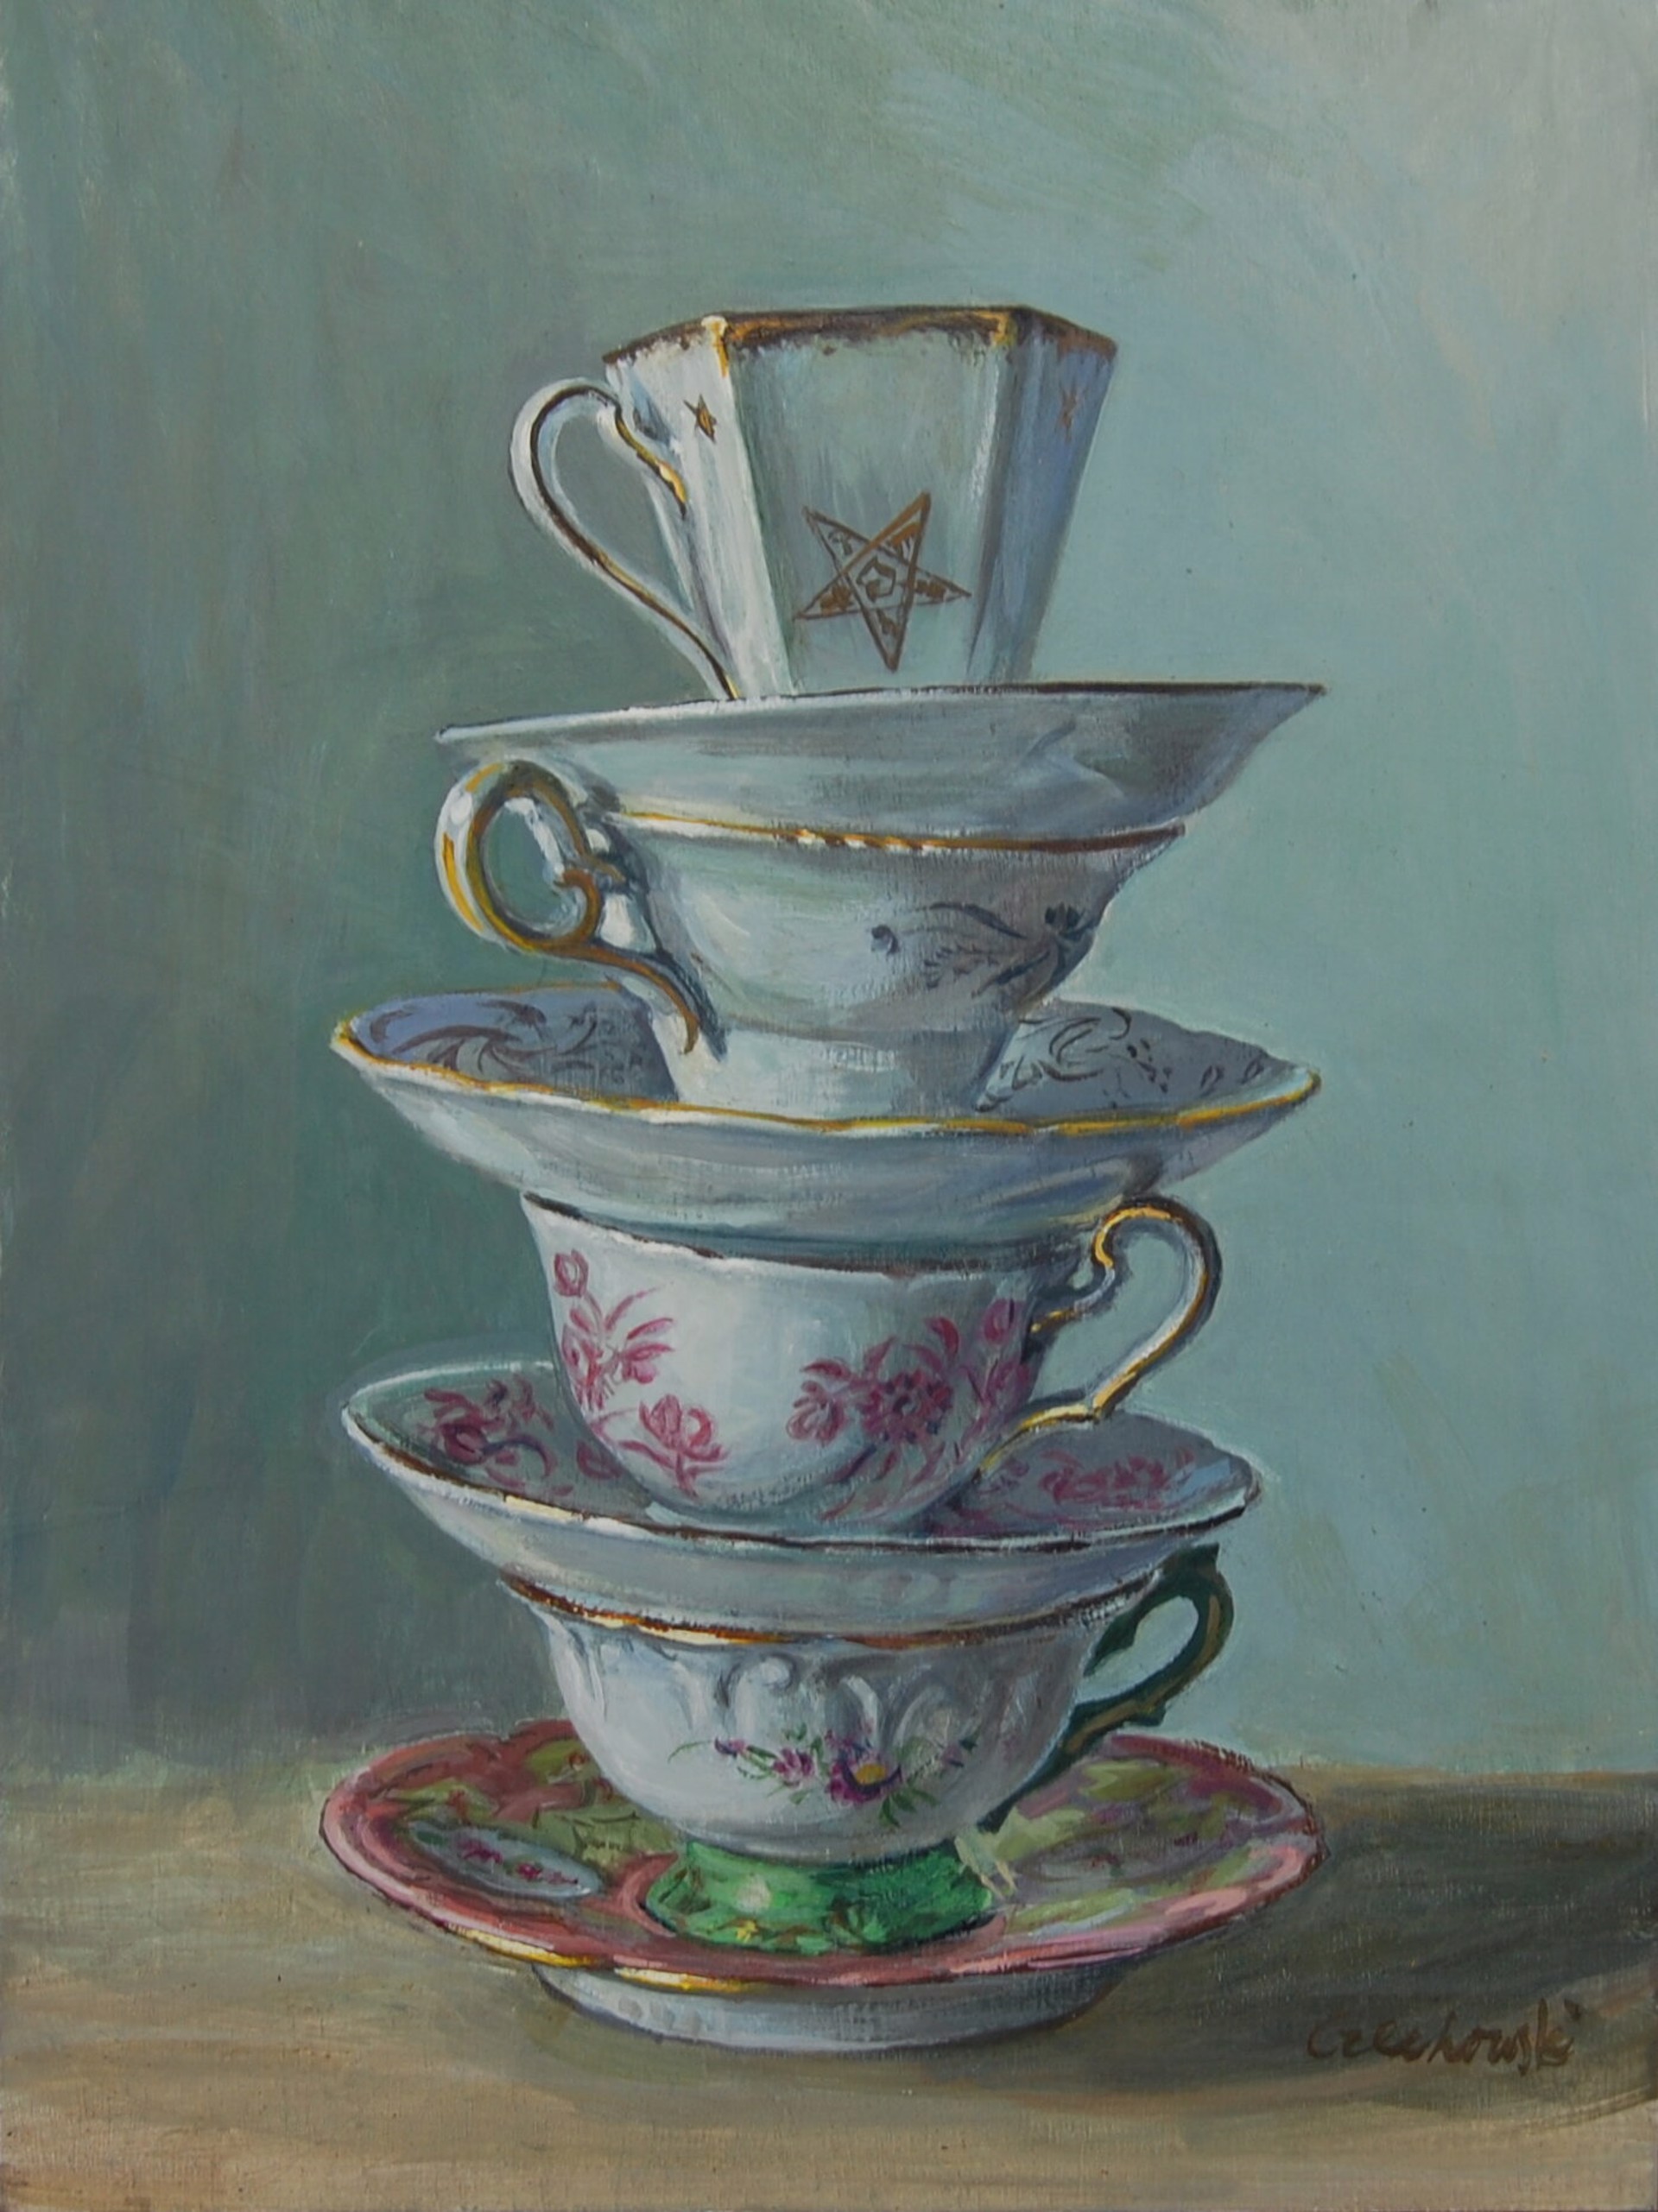 Stack of Teacups by Alicia Czechowski